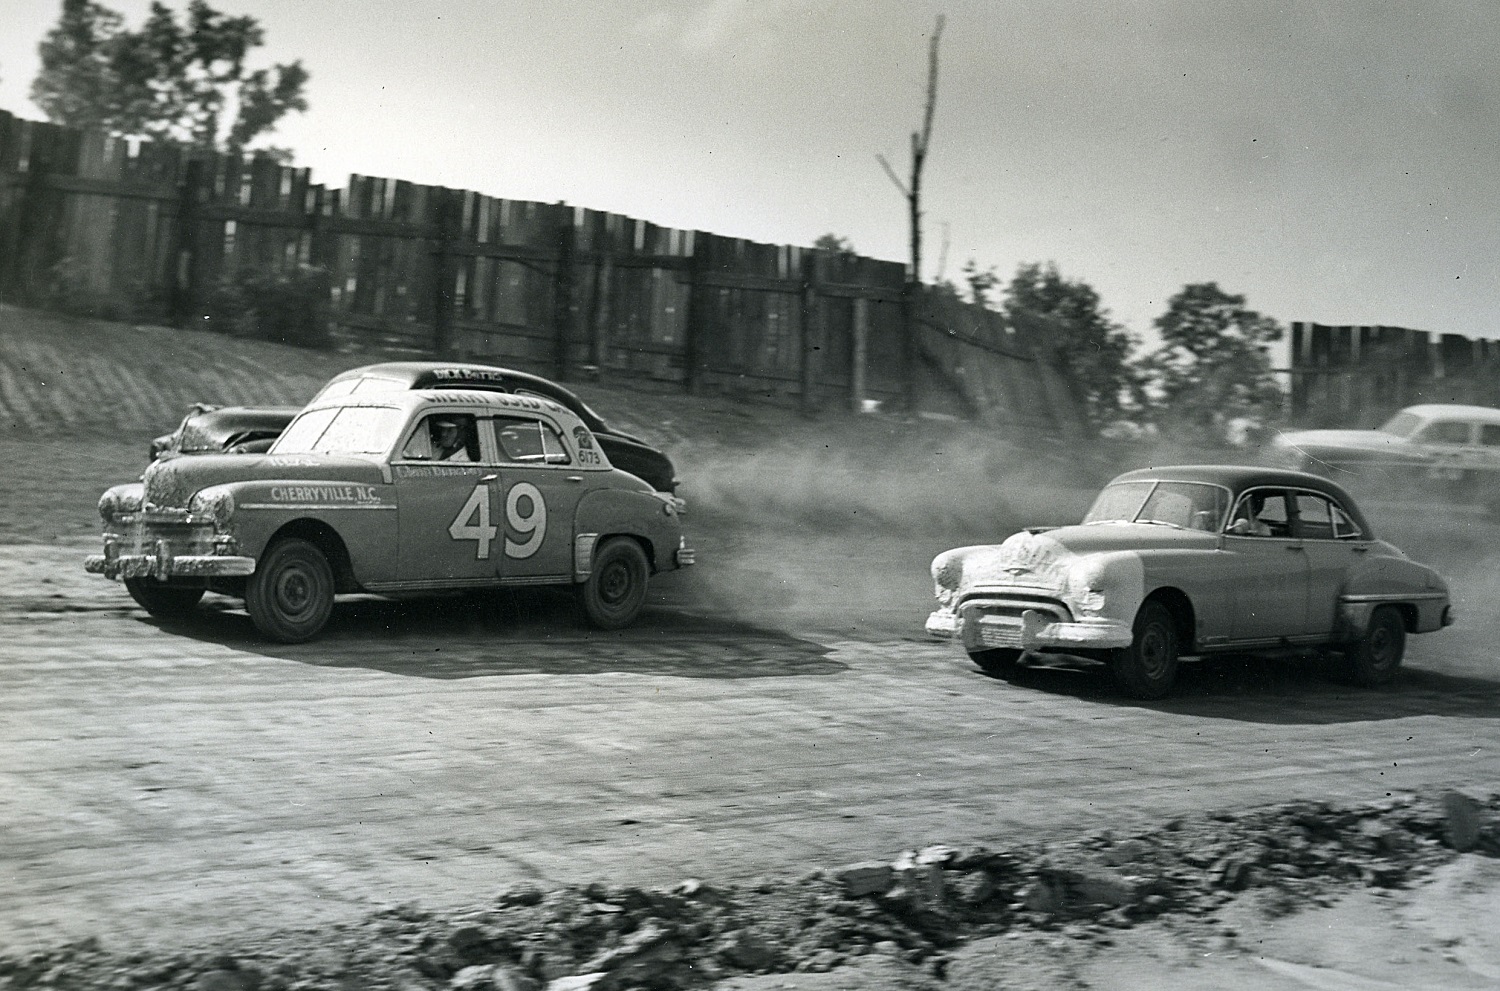 Glenn Dunaway, left, battles with the field during the NASCAR race at Charlotte Speedway in June 1950. | ISC Images & Archives via Getty Images